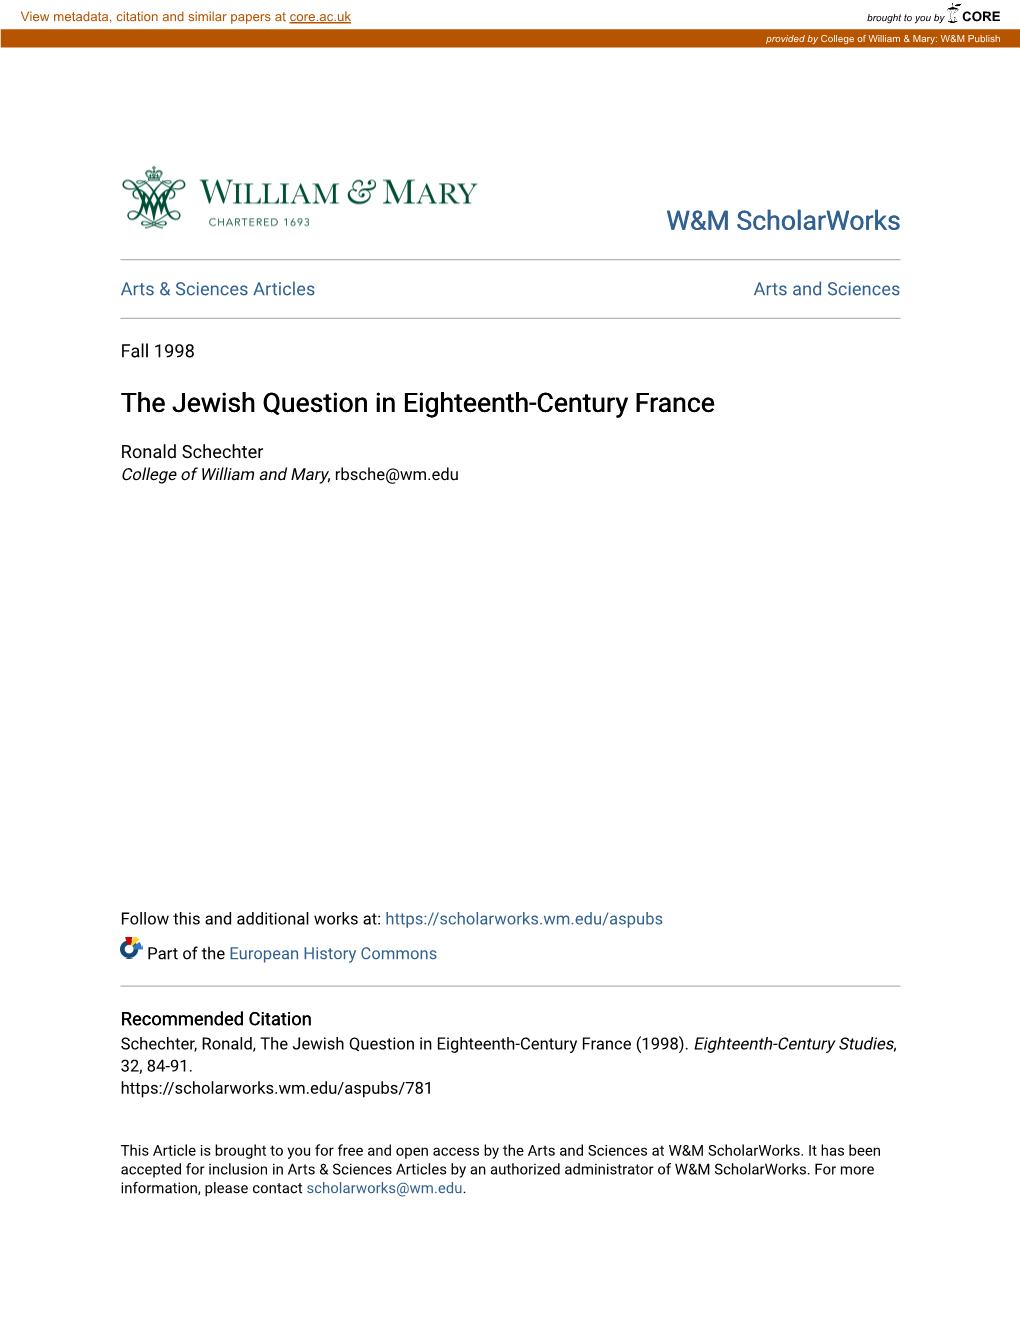 The Jewish Question in Eighteenth-Century France